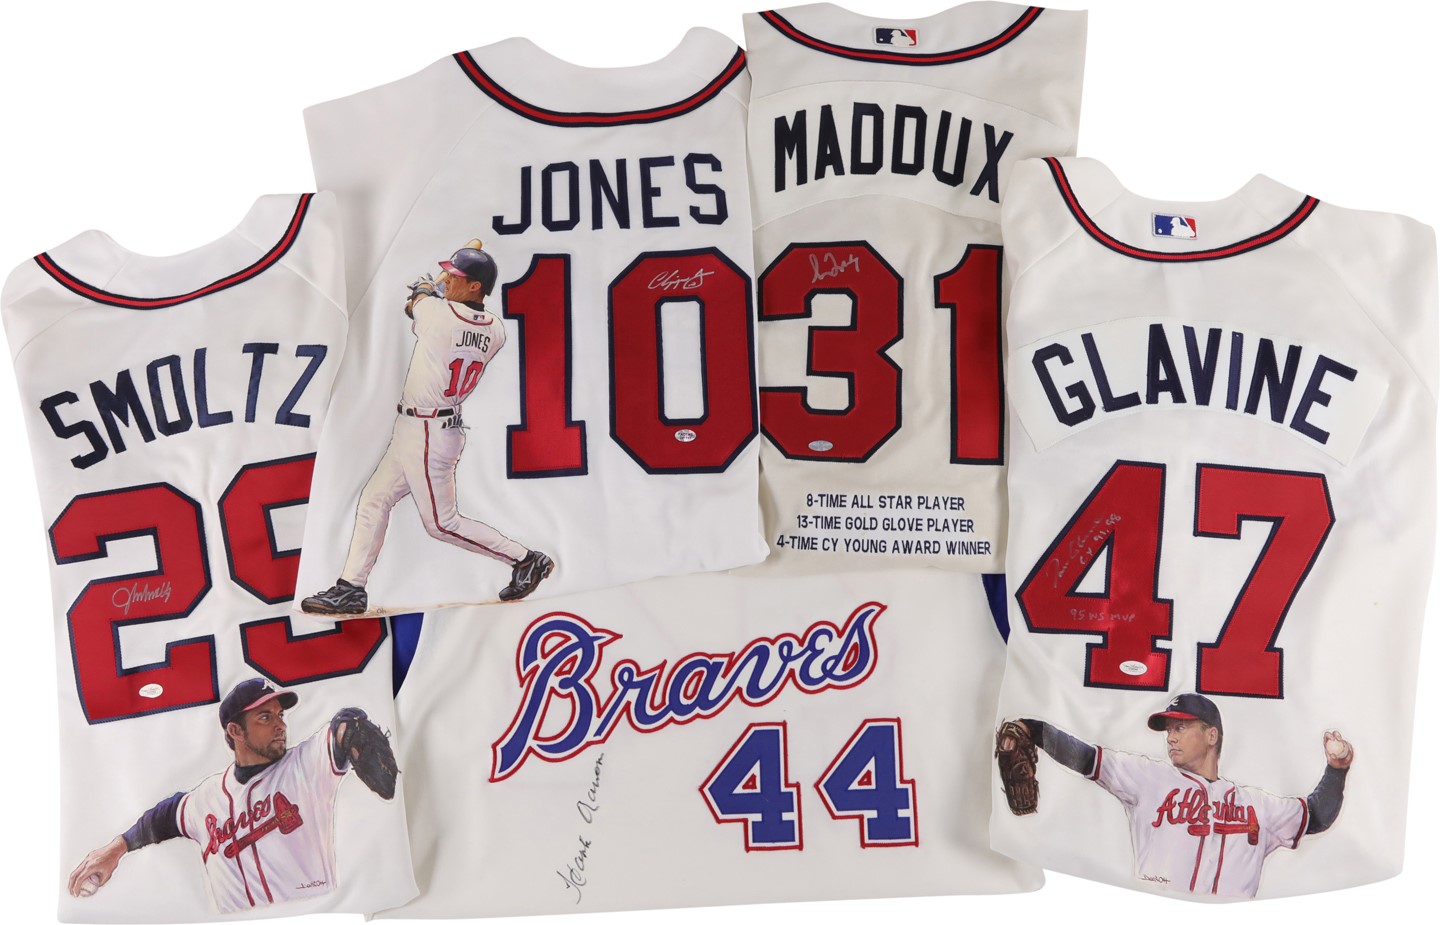 - Atlanta Braves Hall of Famers and Stars Signed Jerseys with "1 of 1" Hand Painted Jerseys (11)